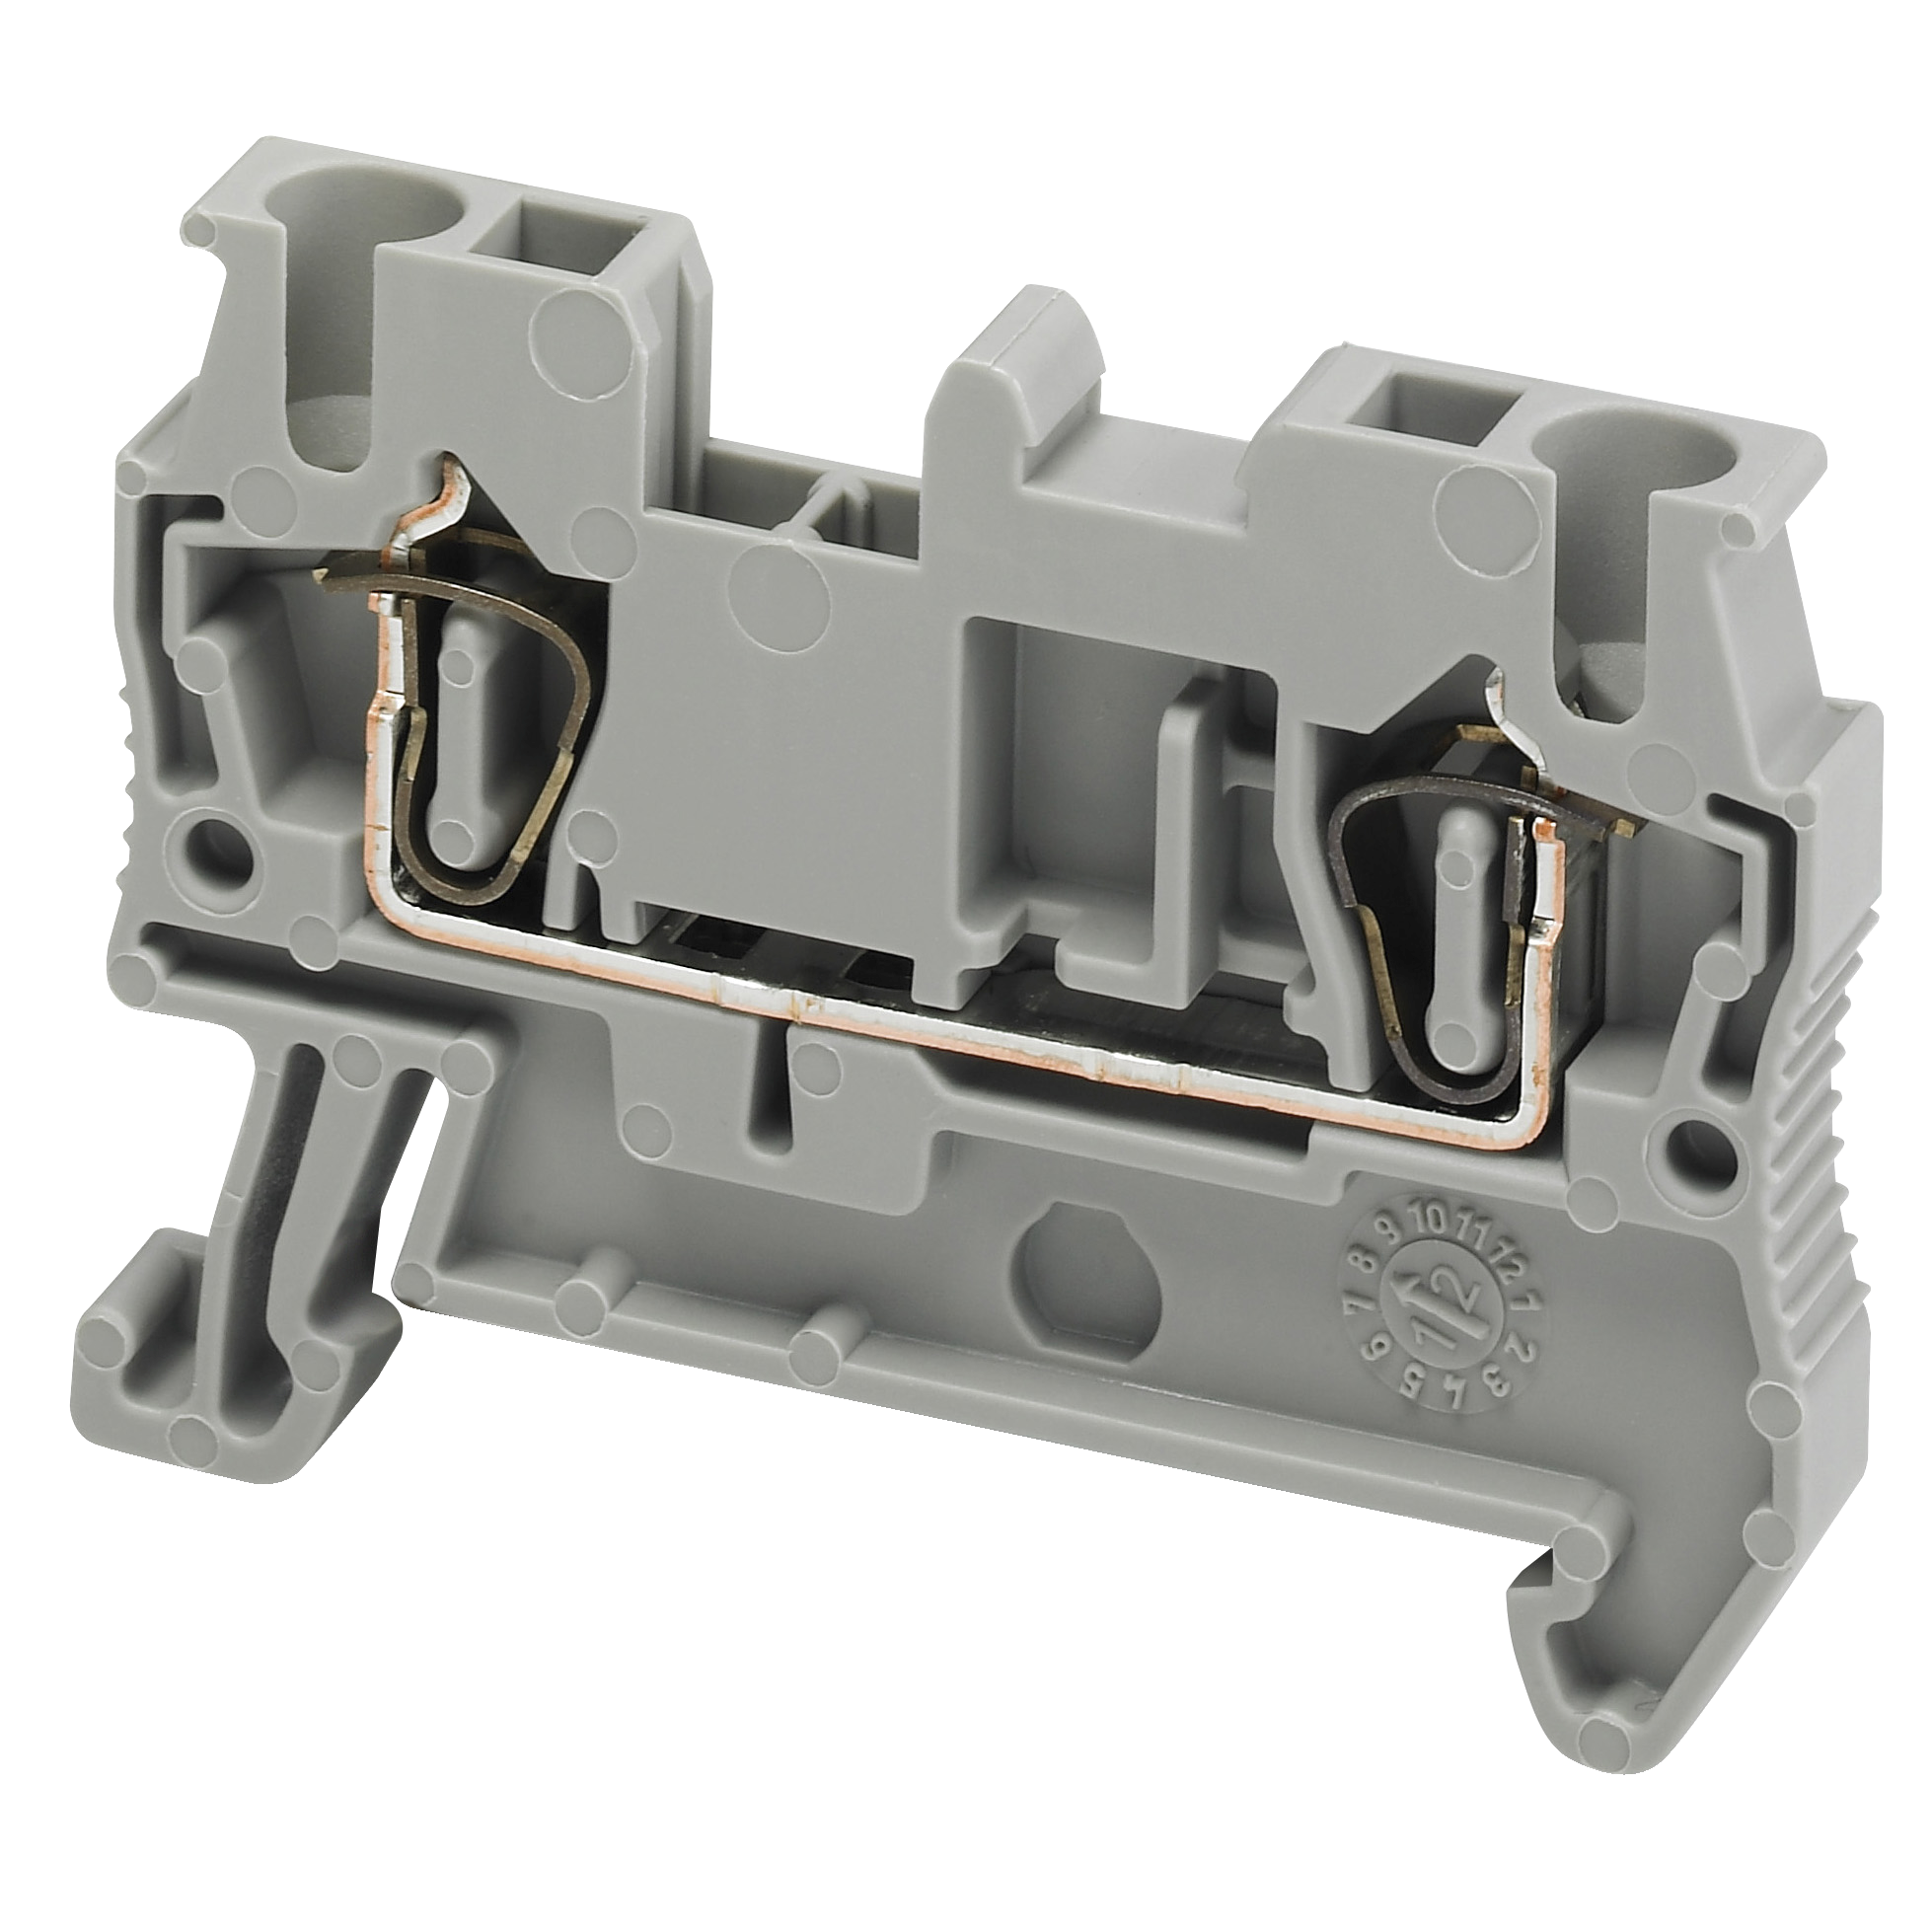 Terminal block, Linergy TR, spring type, feed through, 2 points, 2.5mm², grey